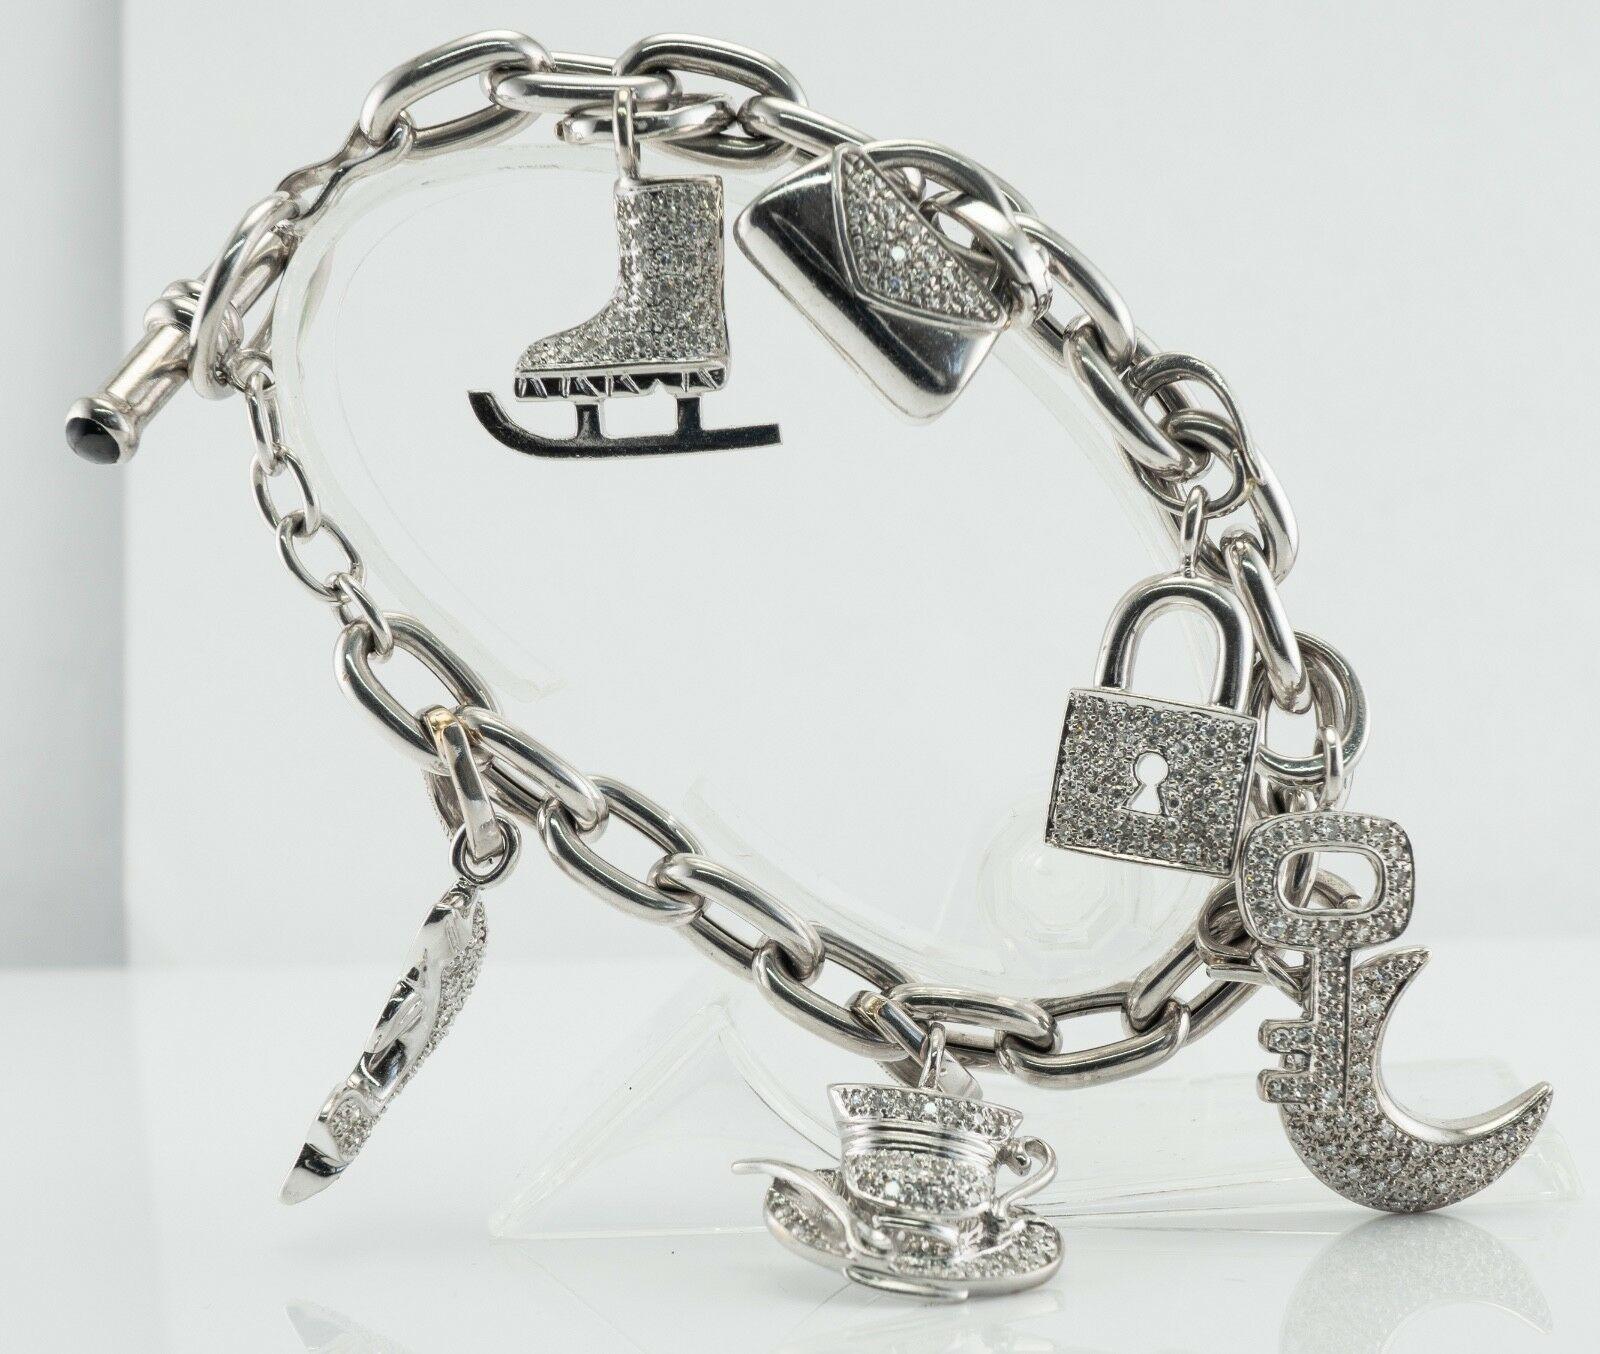 This amazing multi- charm diamond bracelet has been made in Italy. The chunky chain is made in solid 18K White Gold and all charms are solid 14K White Gold. There are seven charms depicting skates, crescent moon, dolphin (has a genuine Earth mined